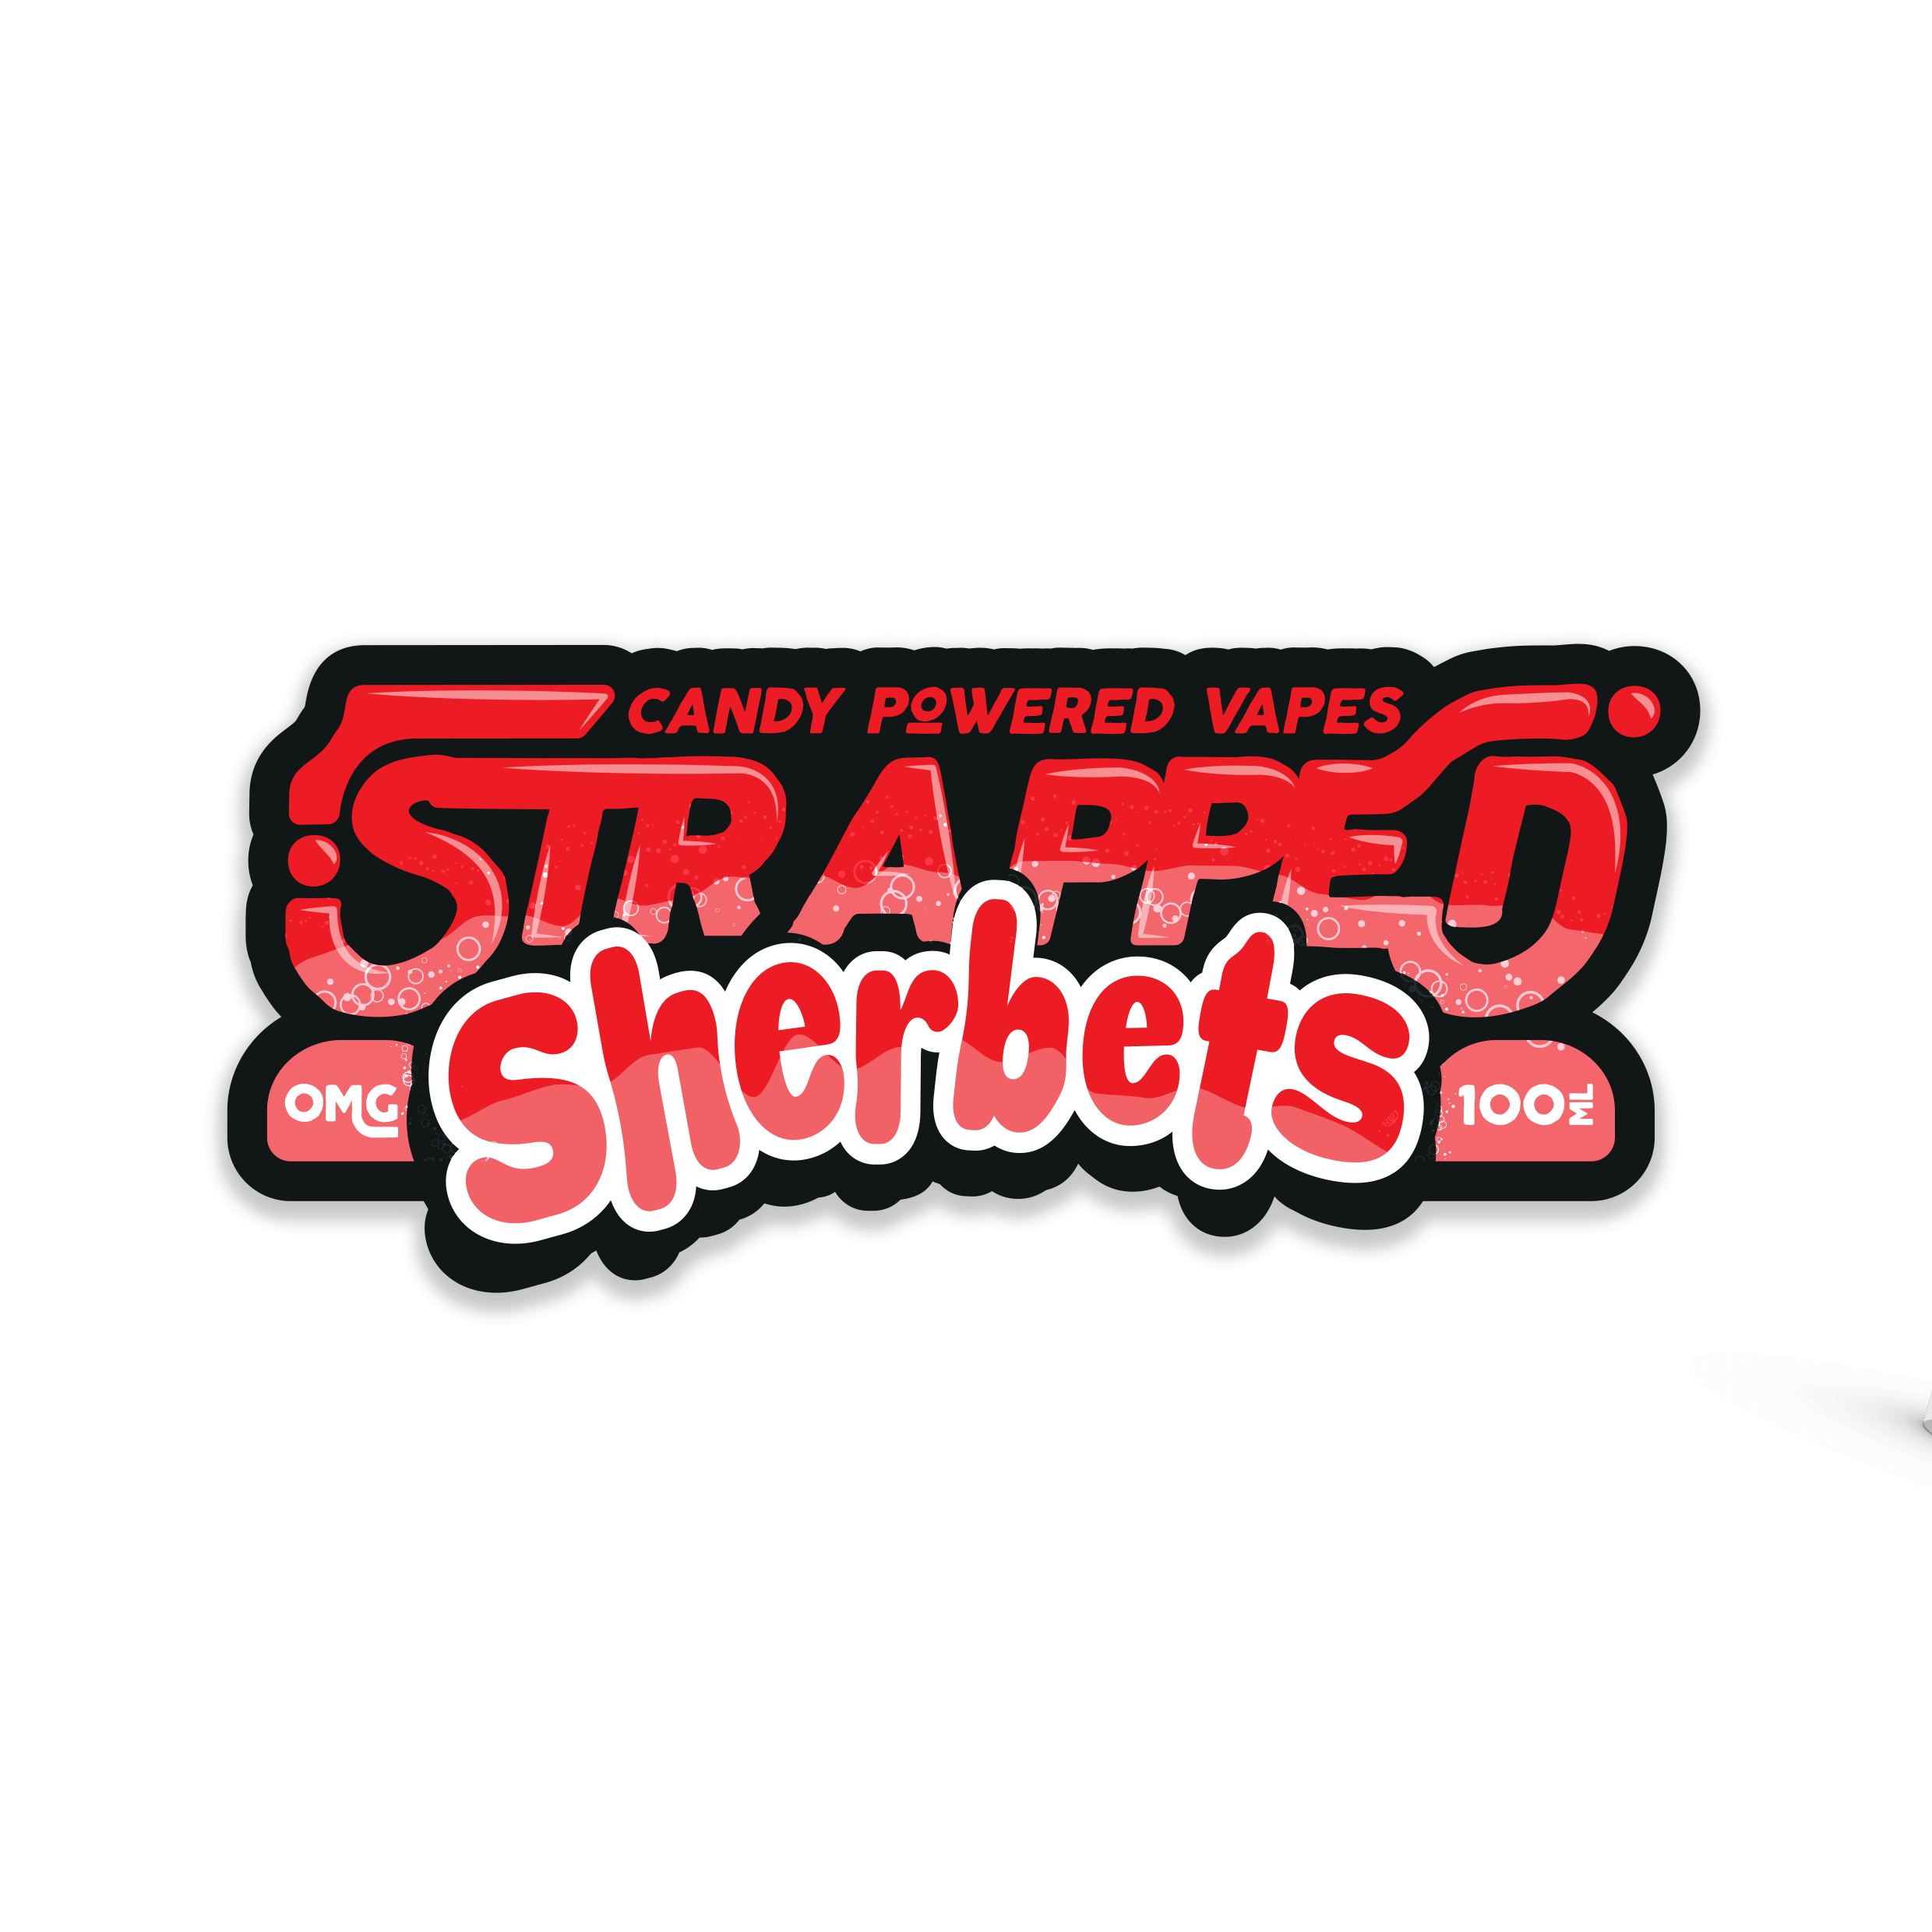 Candy powered vapes strapped sherbets logo